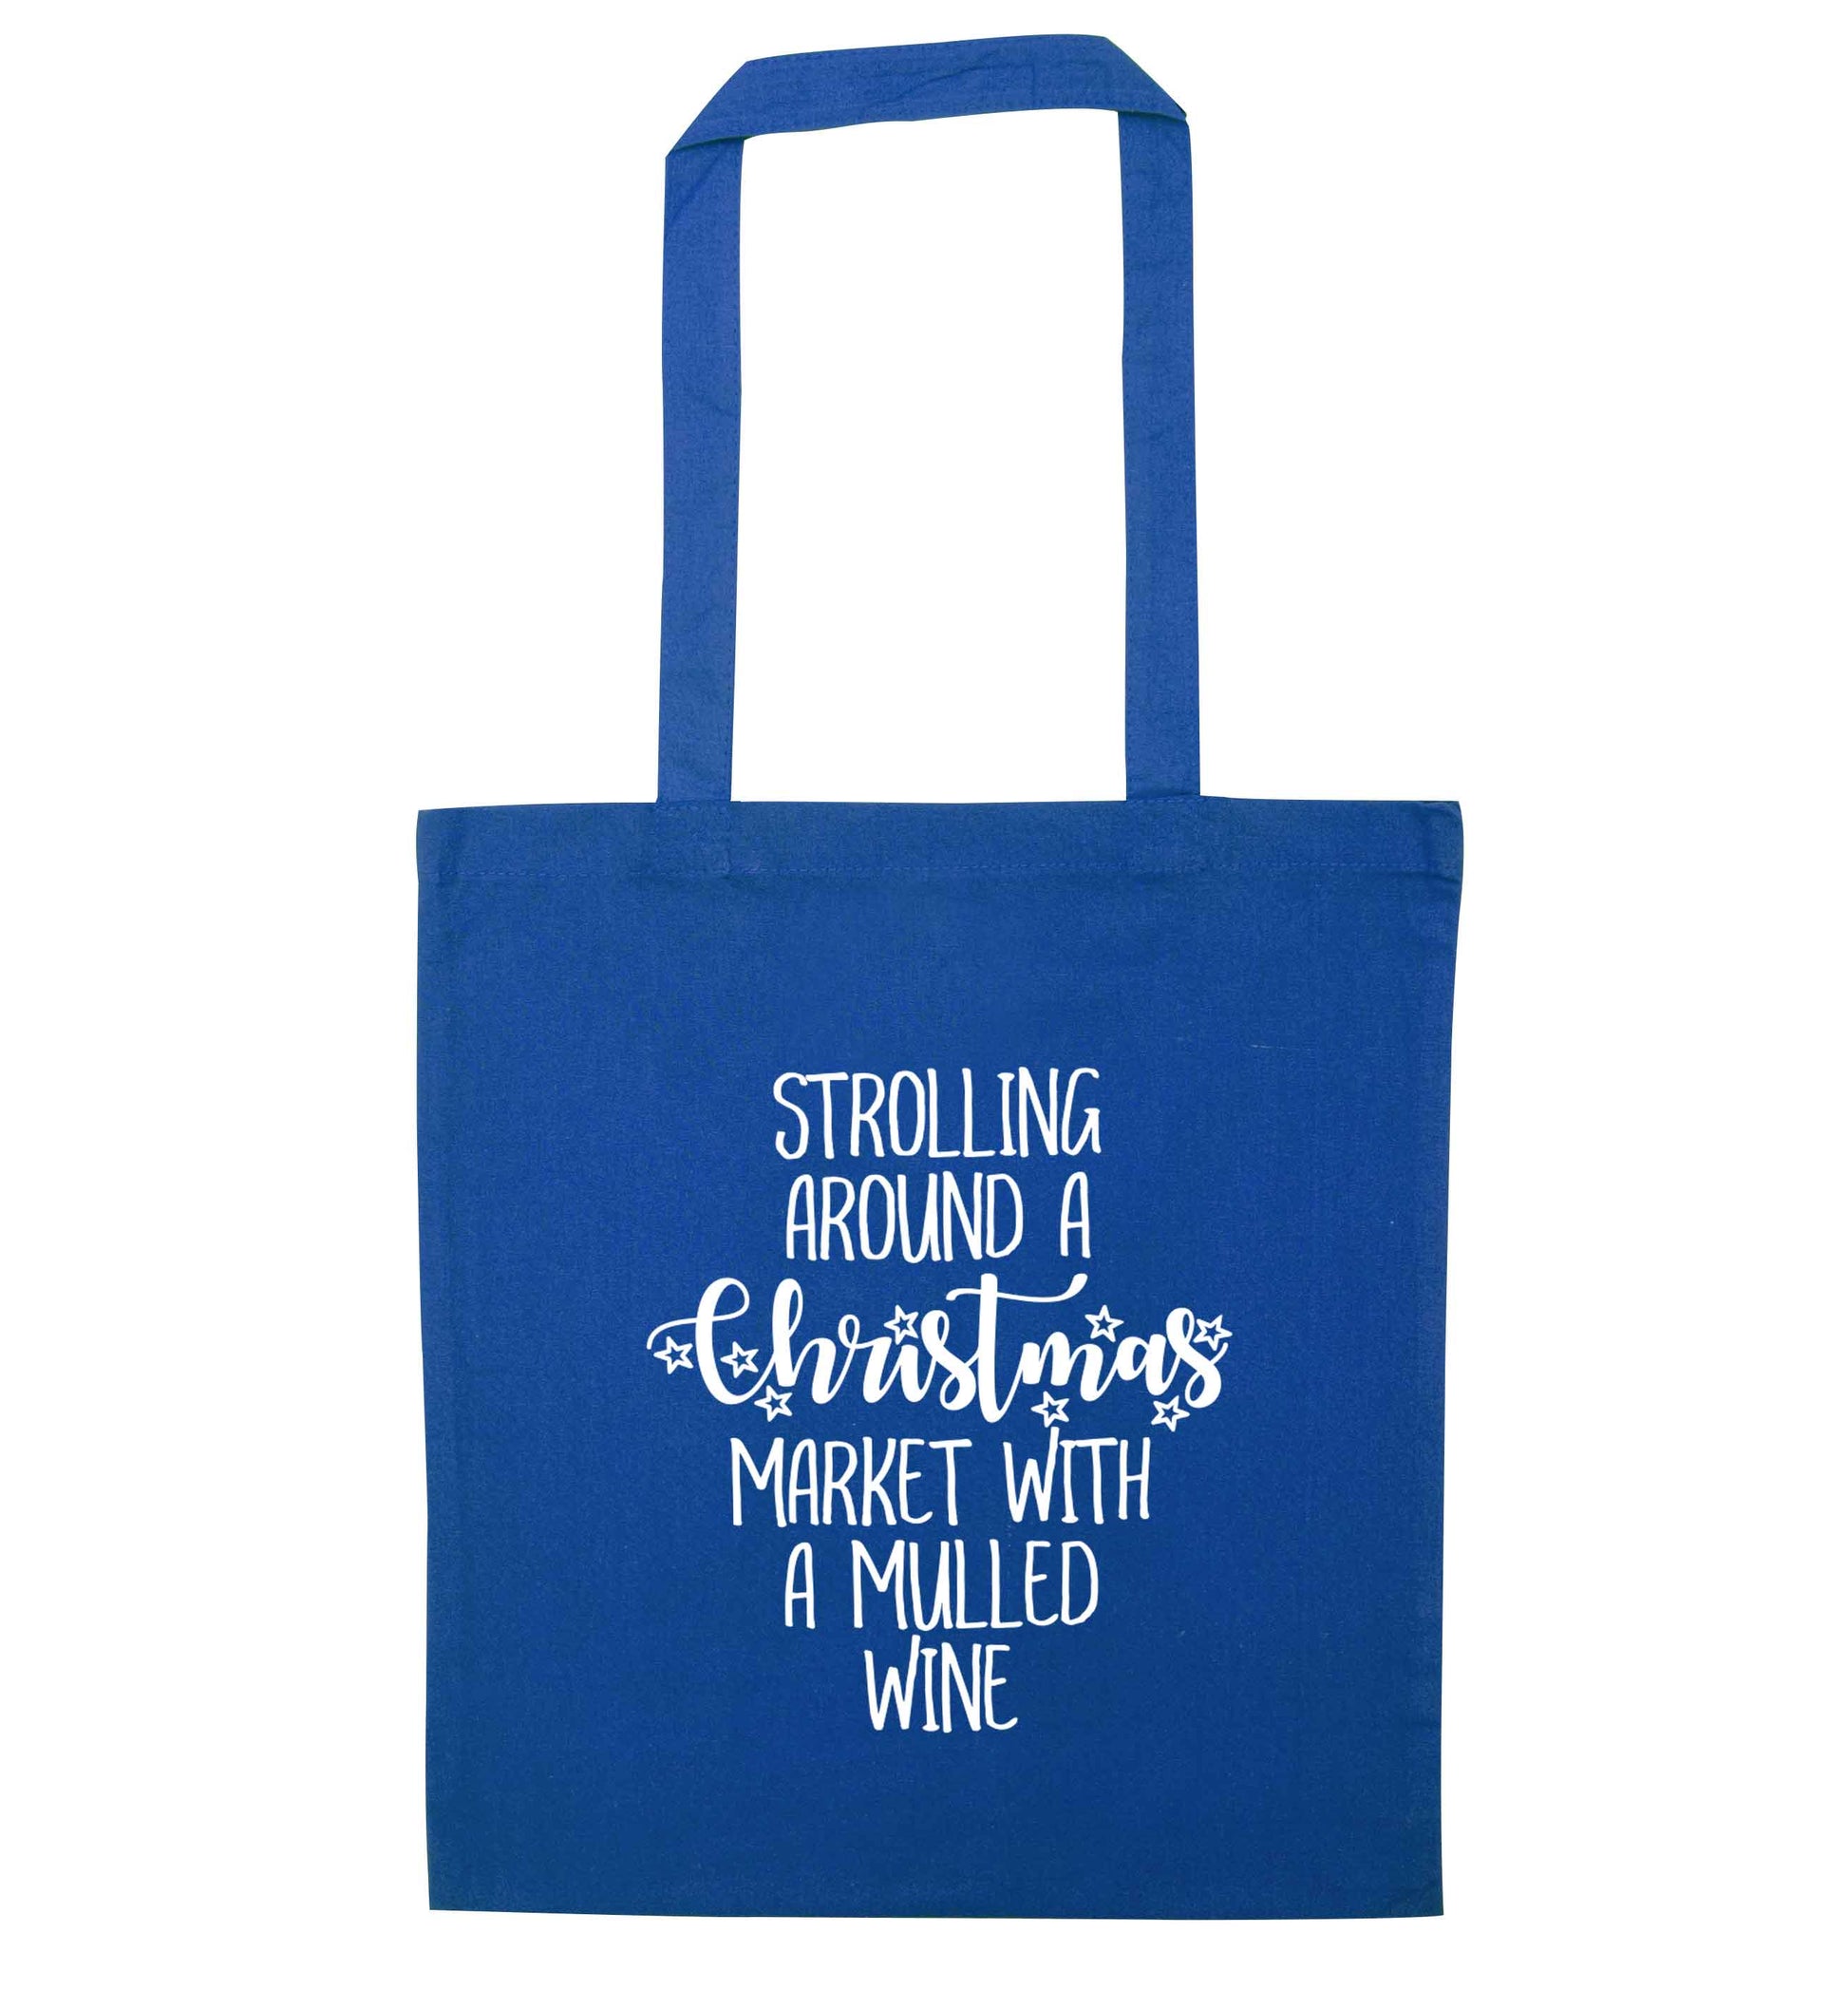 Strolling around a Christmas market with mulled wine blue tote bag